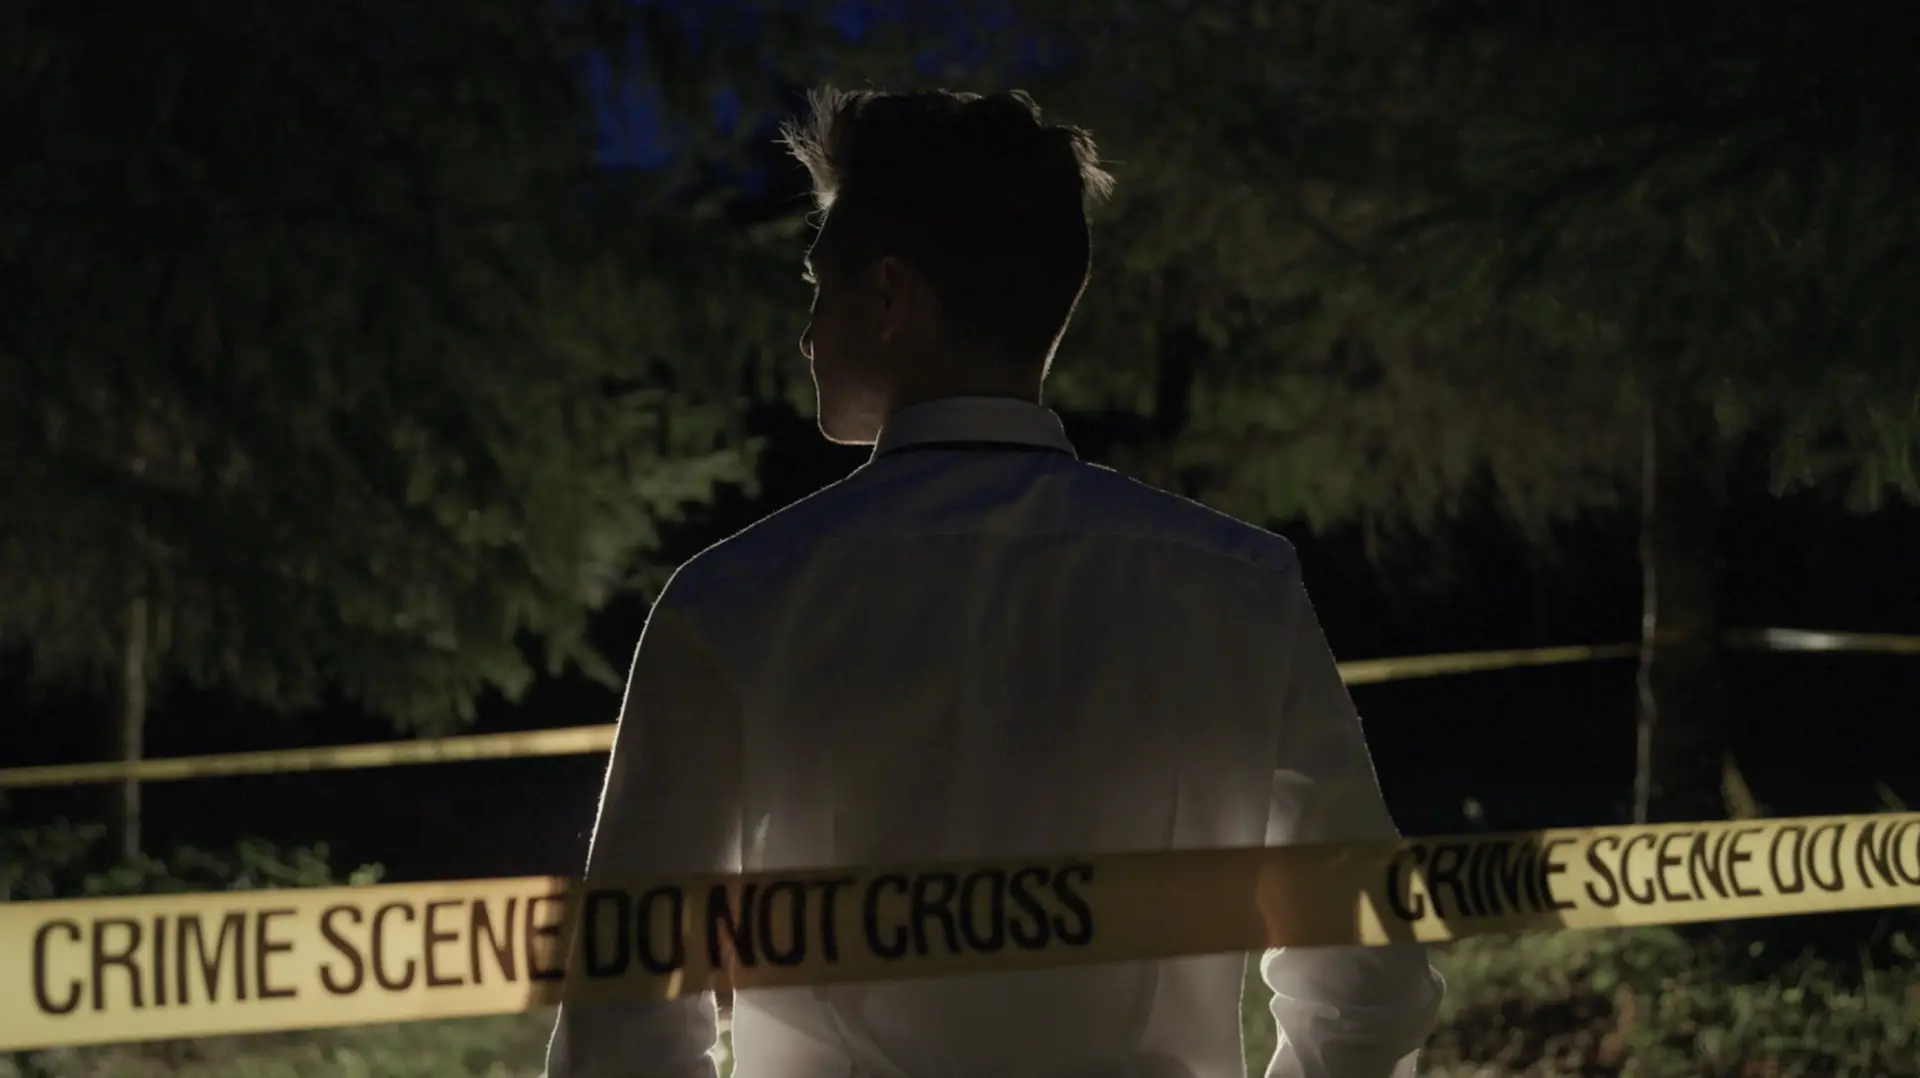 A man standing in front of a crime scene tape at night, involved in crime investigations.